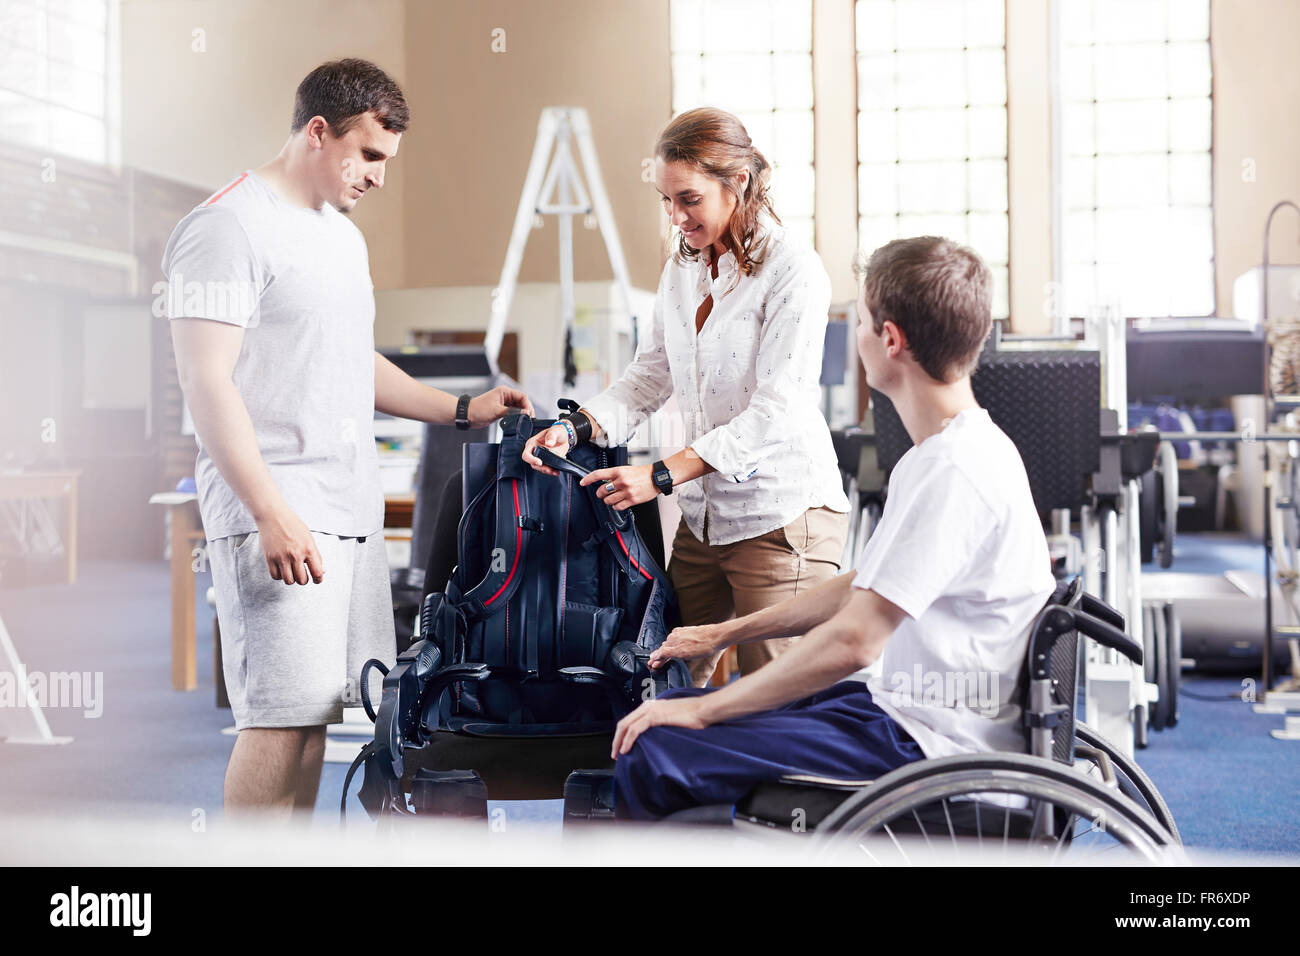 Physical therapists with man in wheelchair Stock Photo